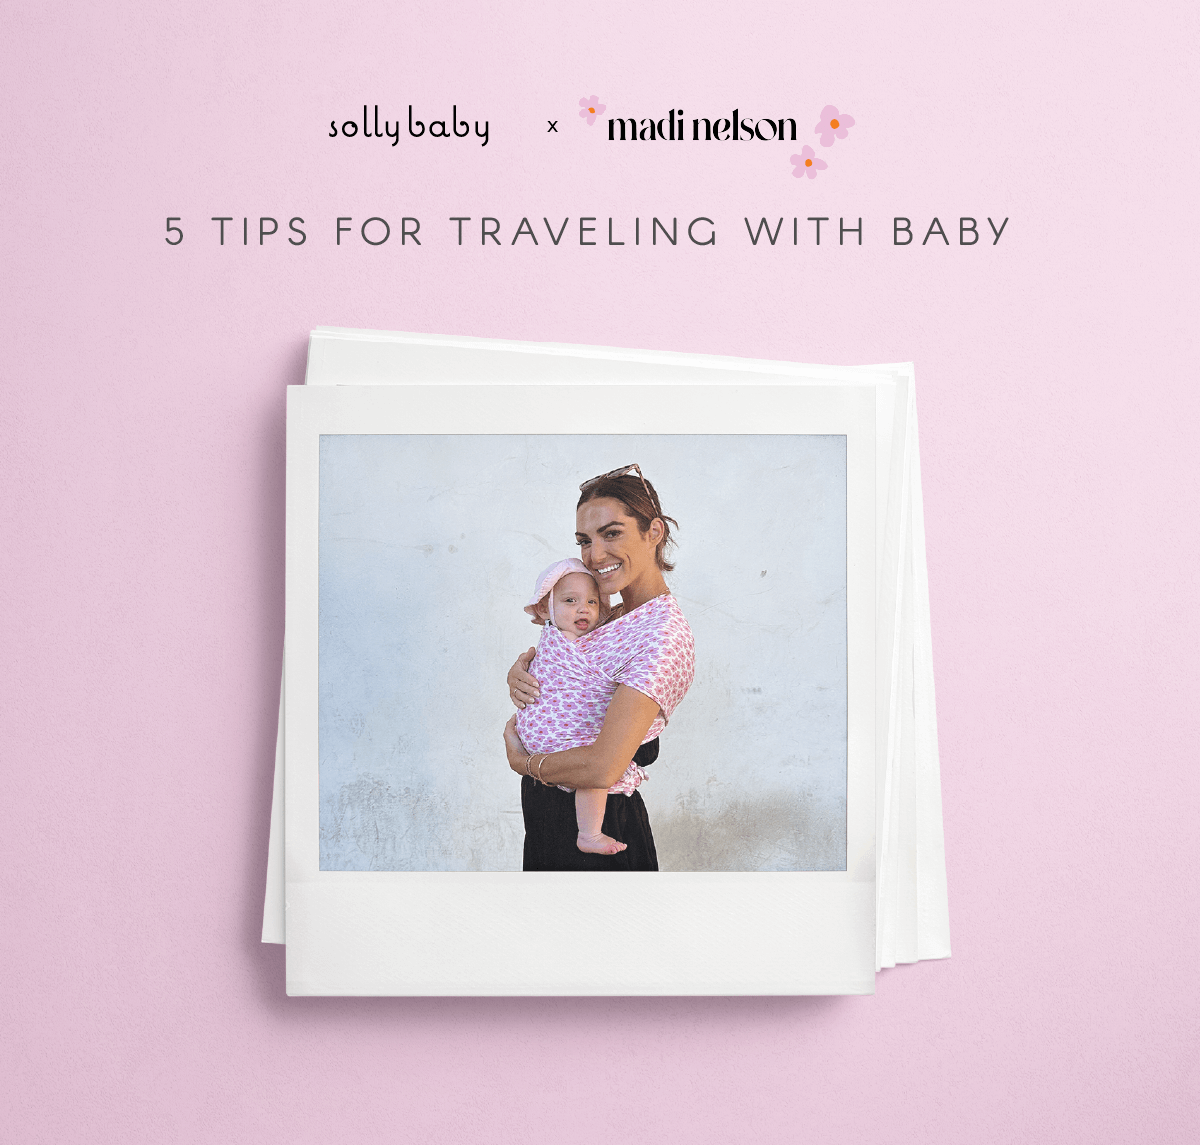 5 Tips for Traveling with Baby with Madi Nelson